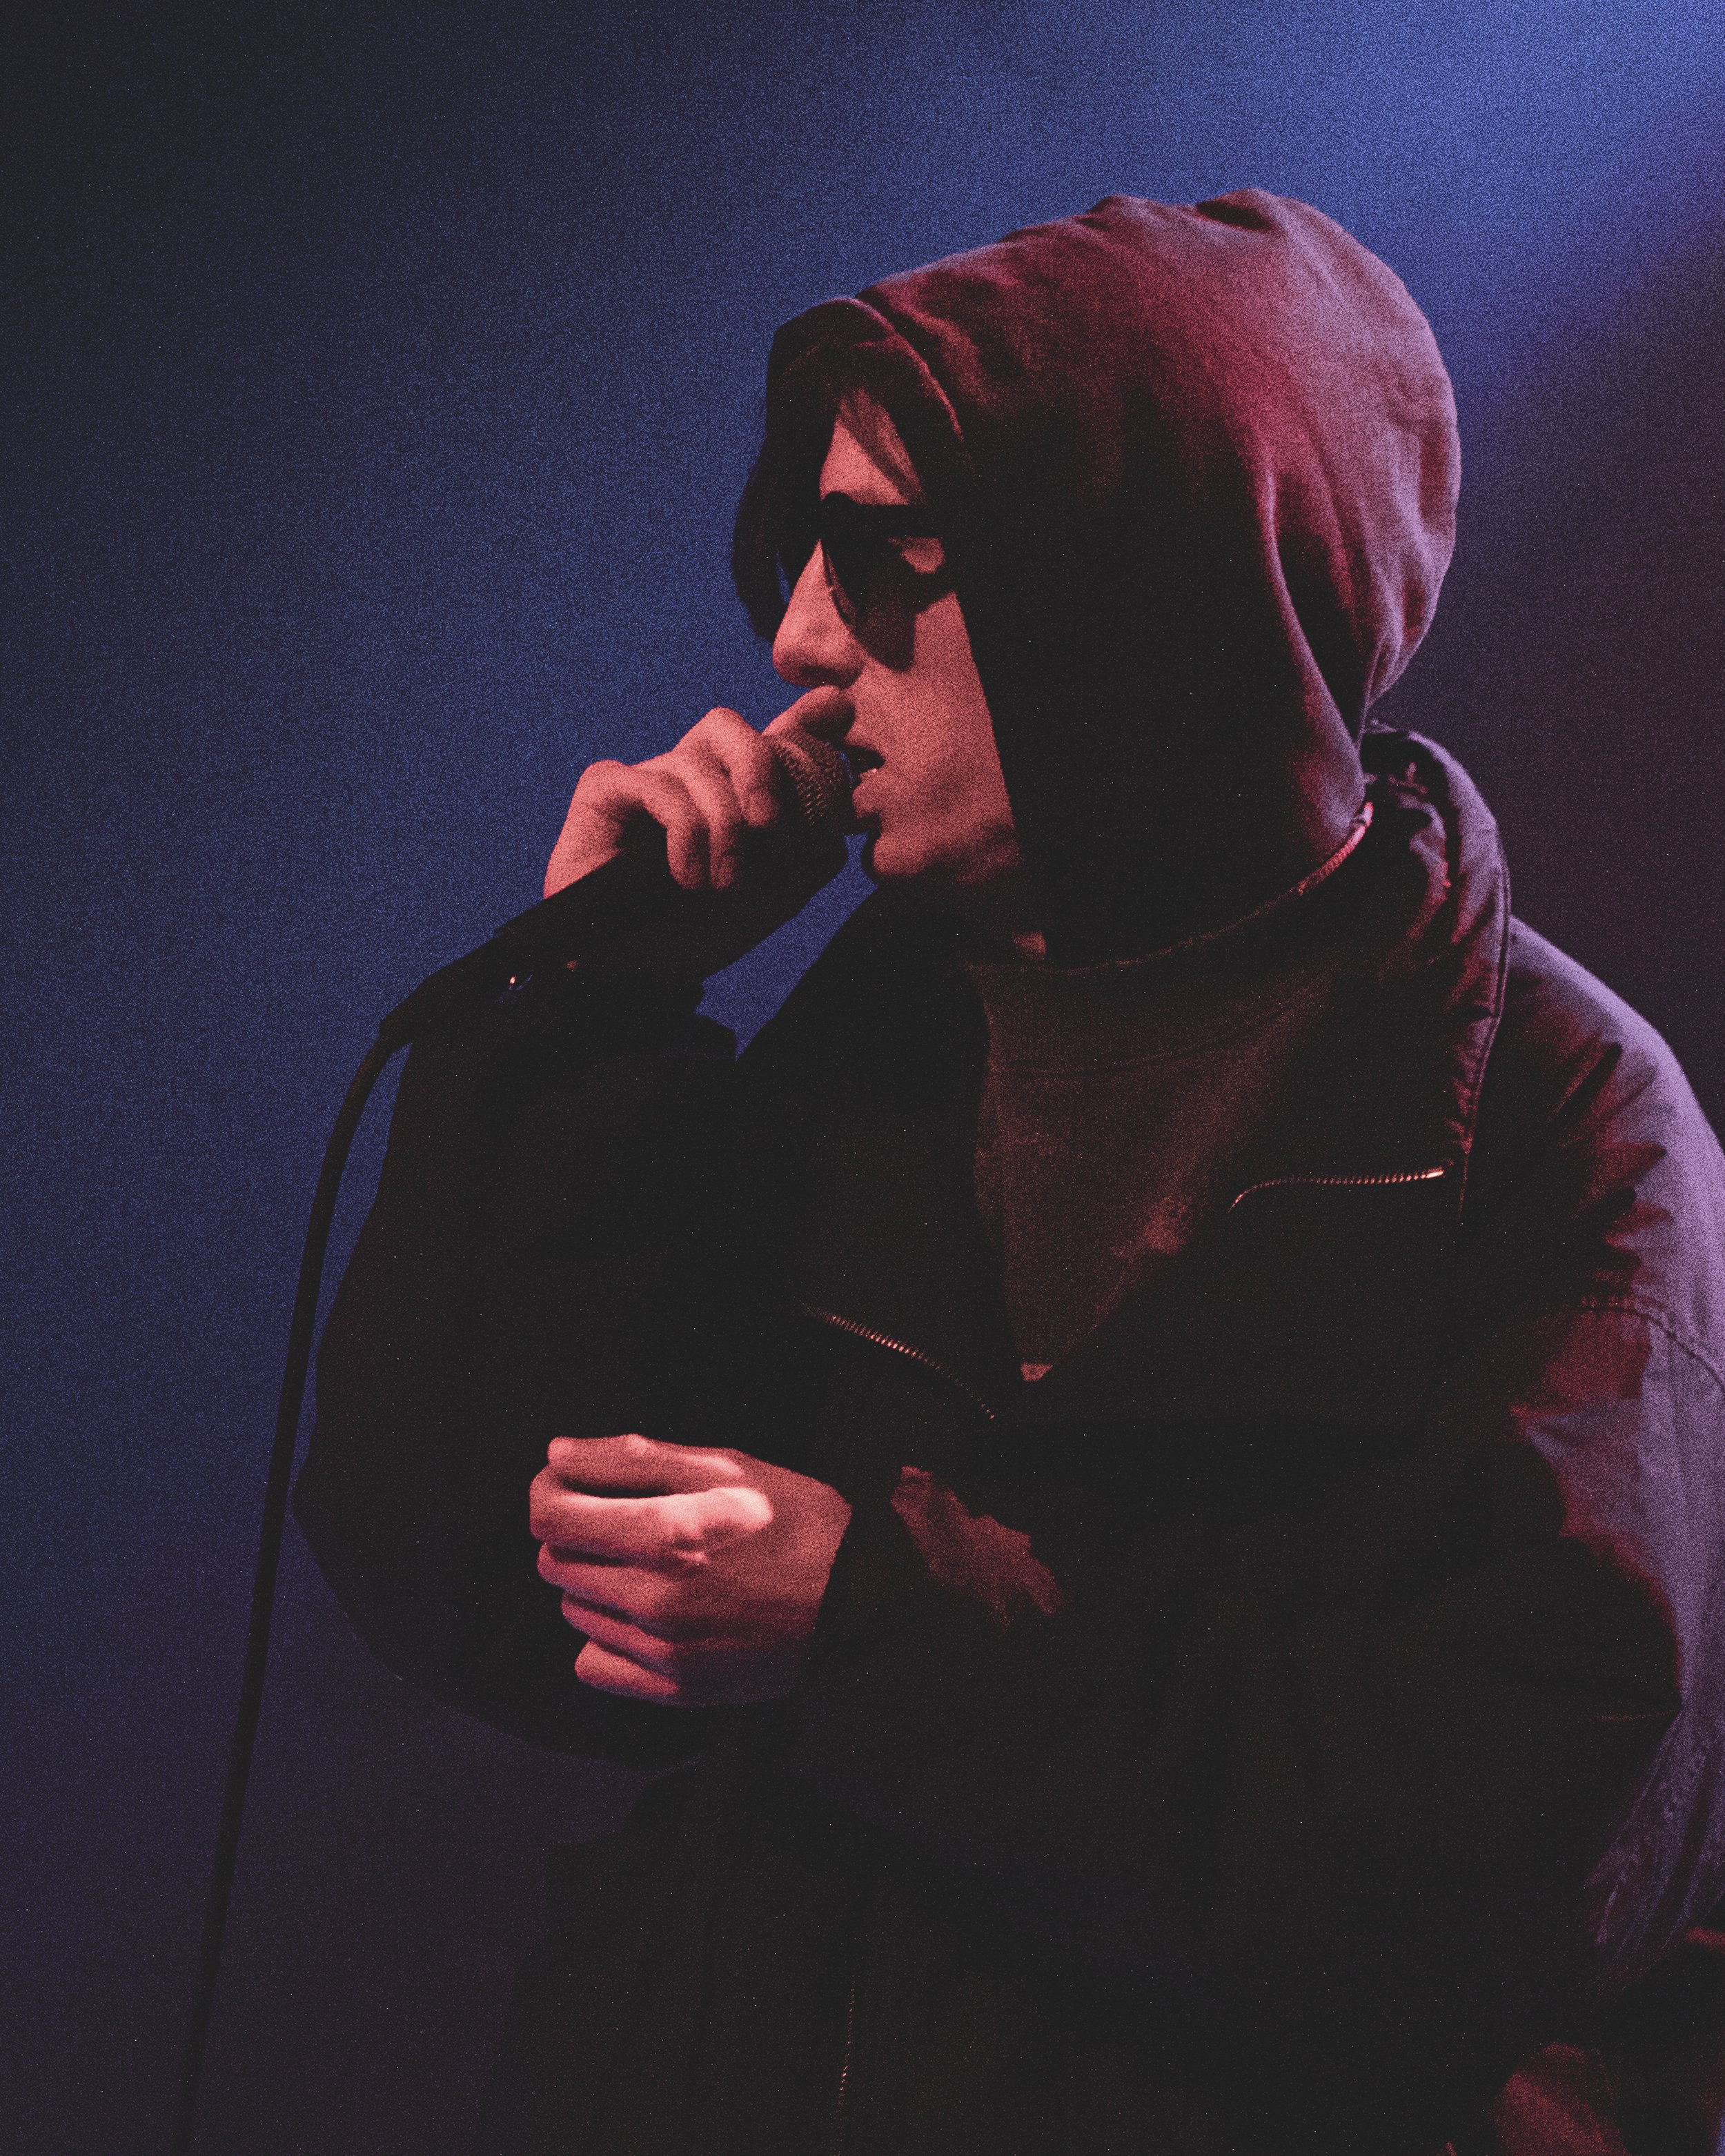 Wicca Phase Springs Eternal -  WINTER TOUR 2022 - The Bluebird Theater - Denver, Colorado - Friday, December 16, 2022- PHOTO BY Mowgli Miles of Interracial Friends - PHOTO BY Mowgli Miles of Interracial Friends-15.JPG